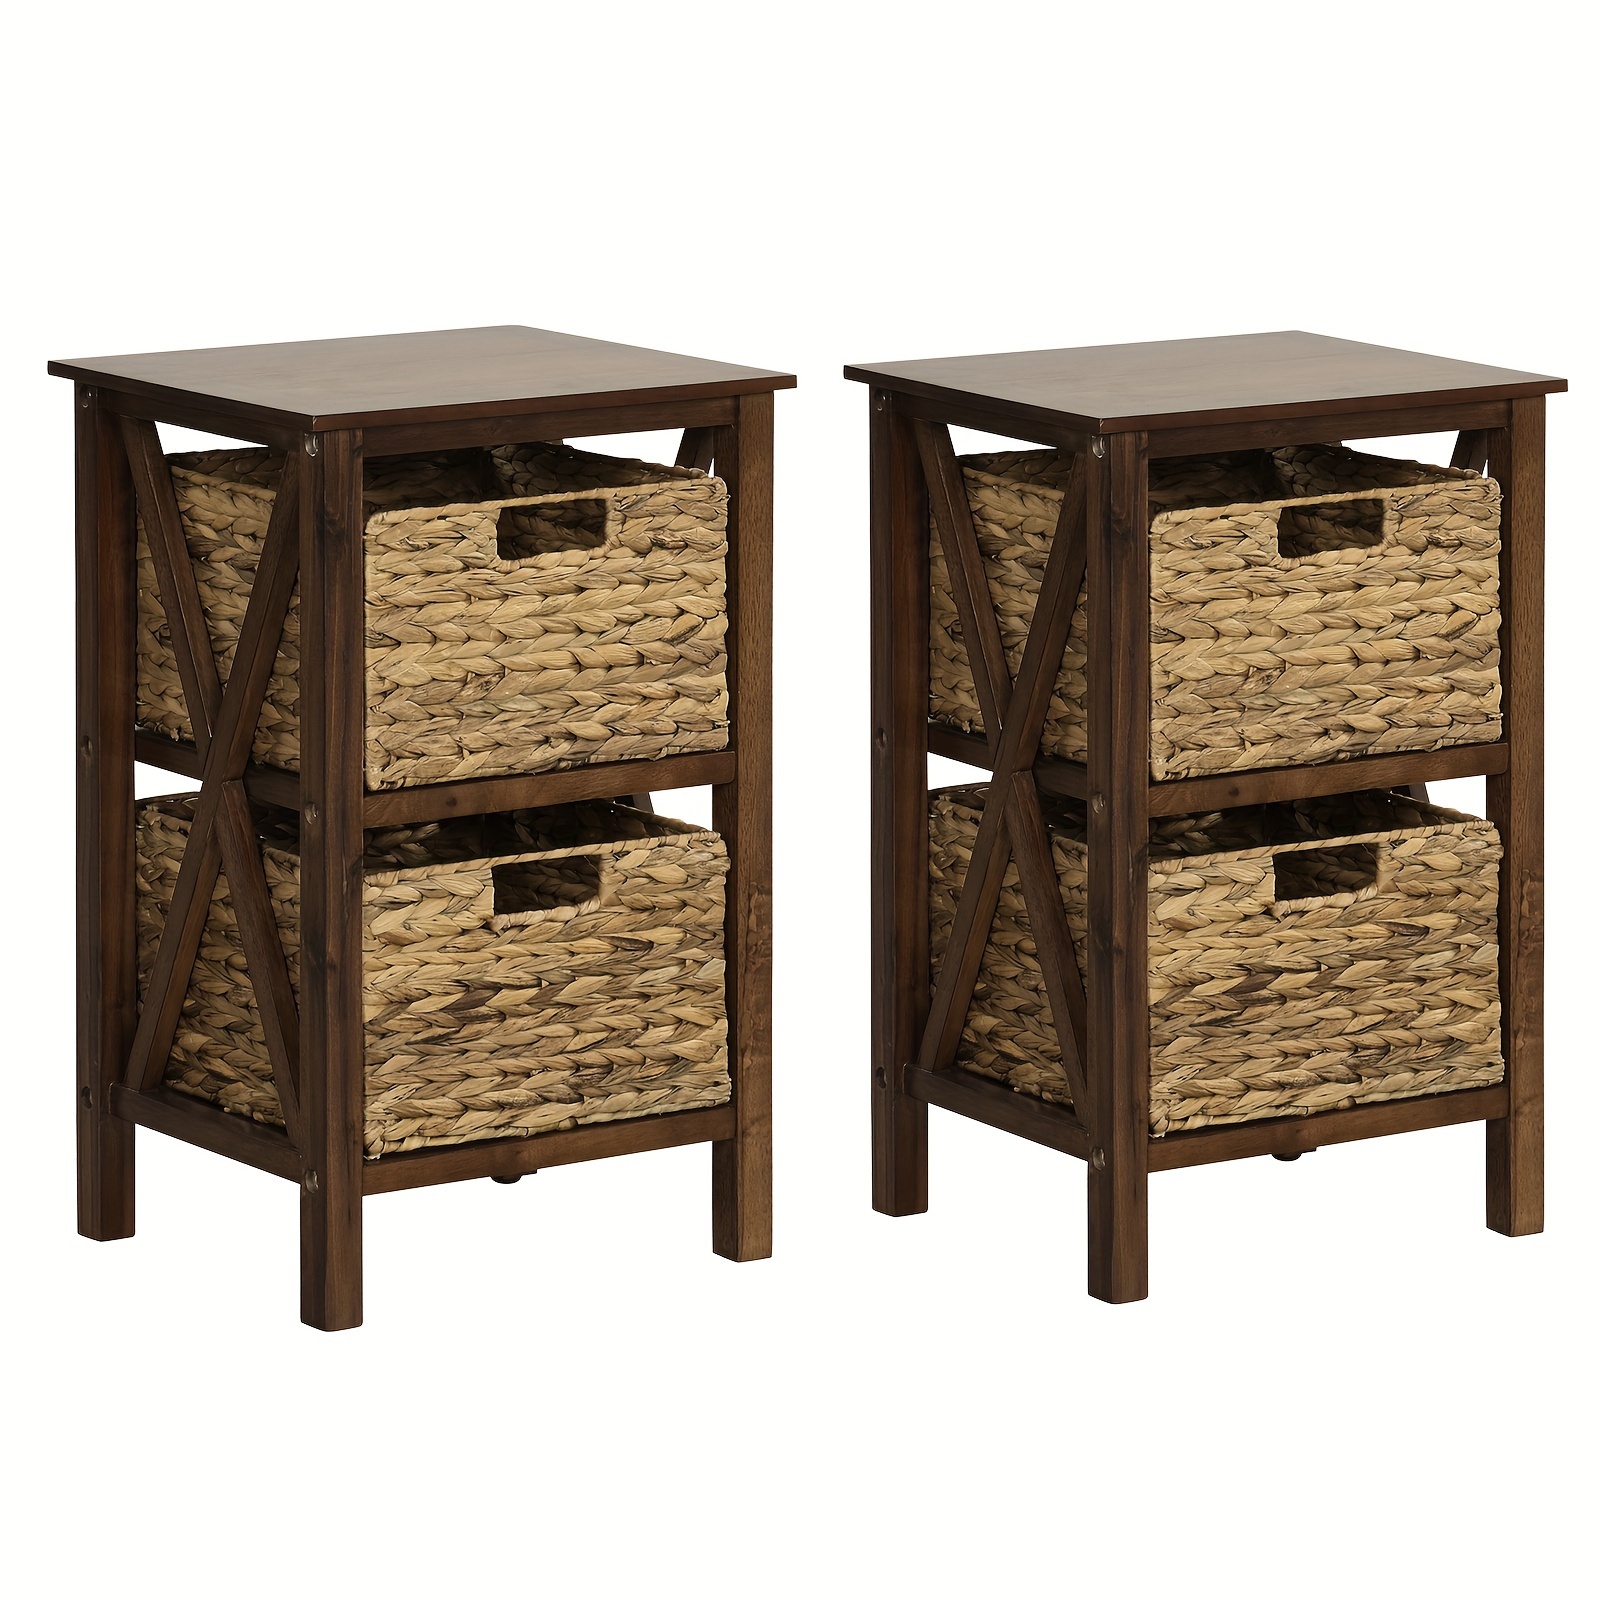 

Set Of 2 Wood Nightstand, Storage Cabinet With 2 Wicker Baskets, Night Stands For Bedroom, Apartment, Home, Dorm, Rustic Brown X-frame On The Side, Easy Assembly